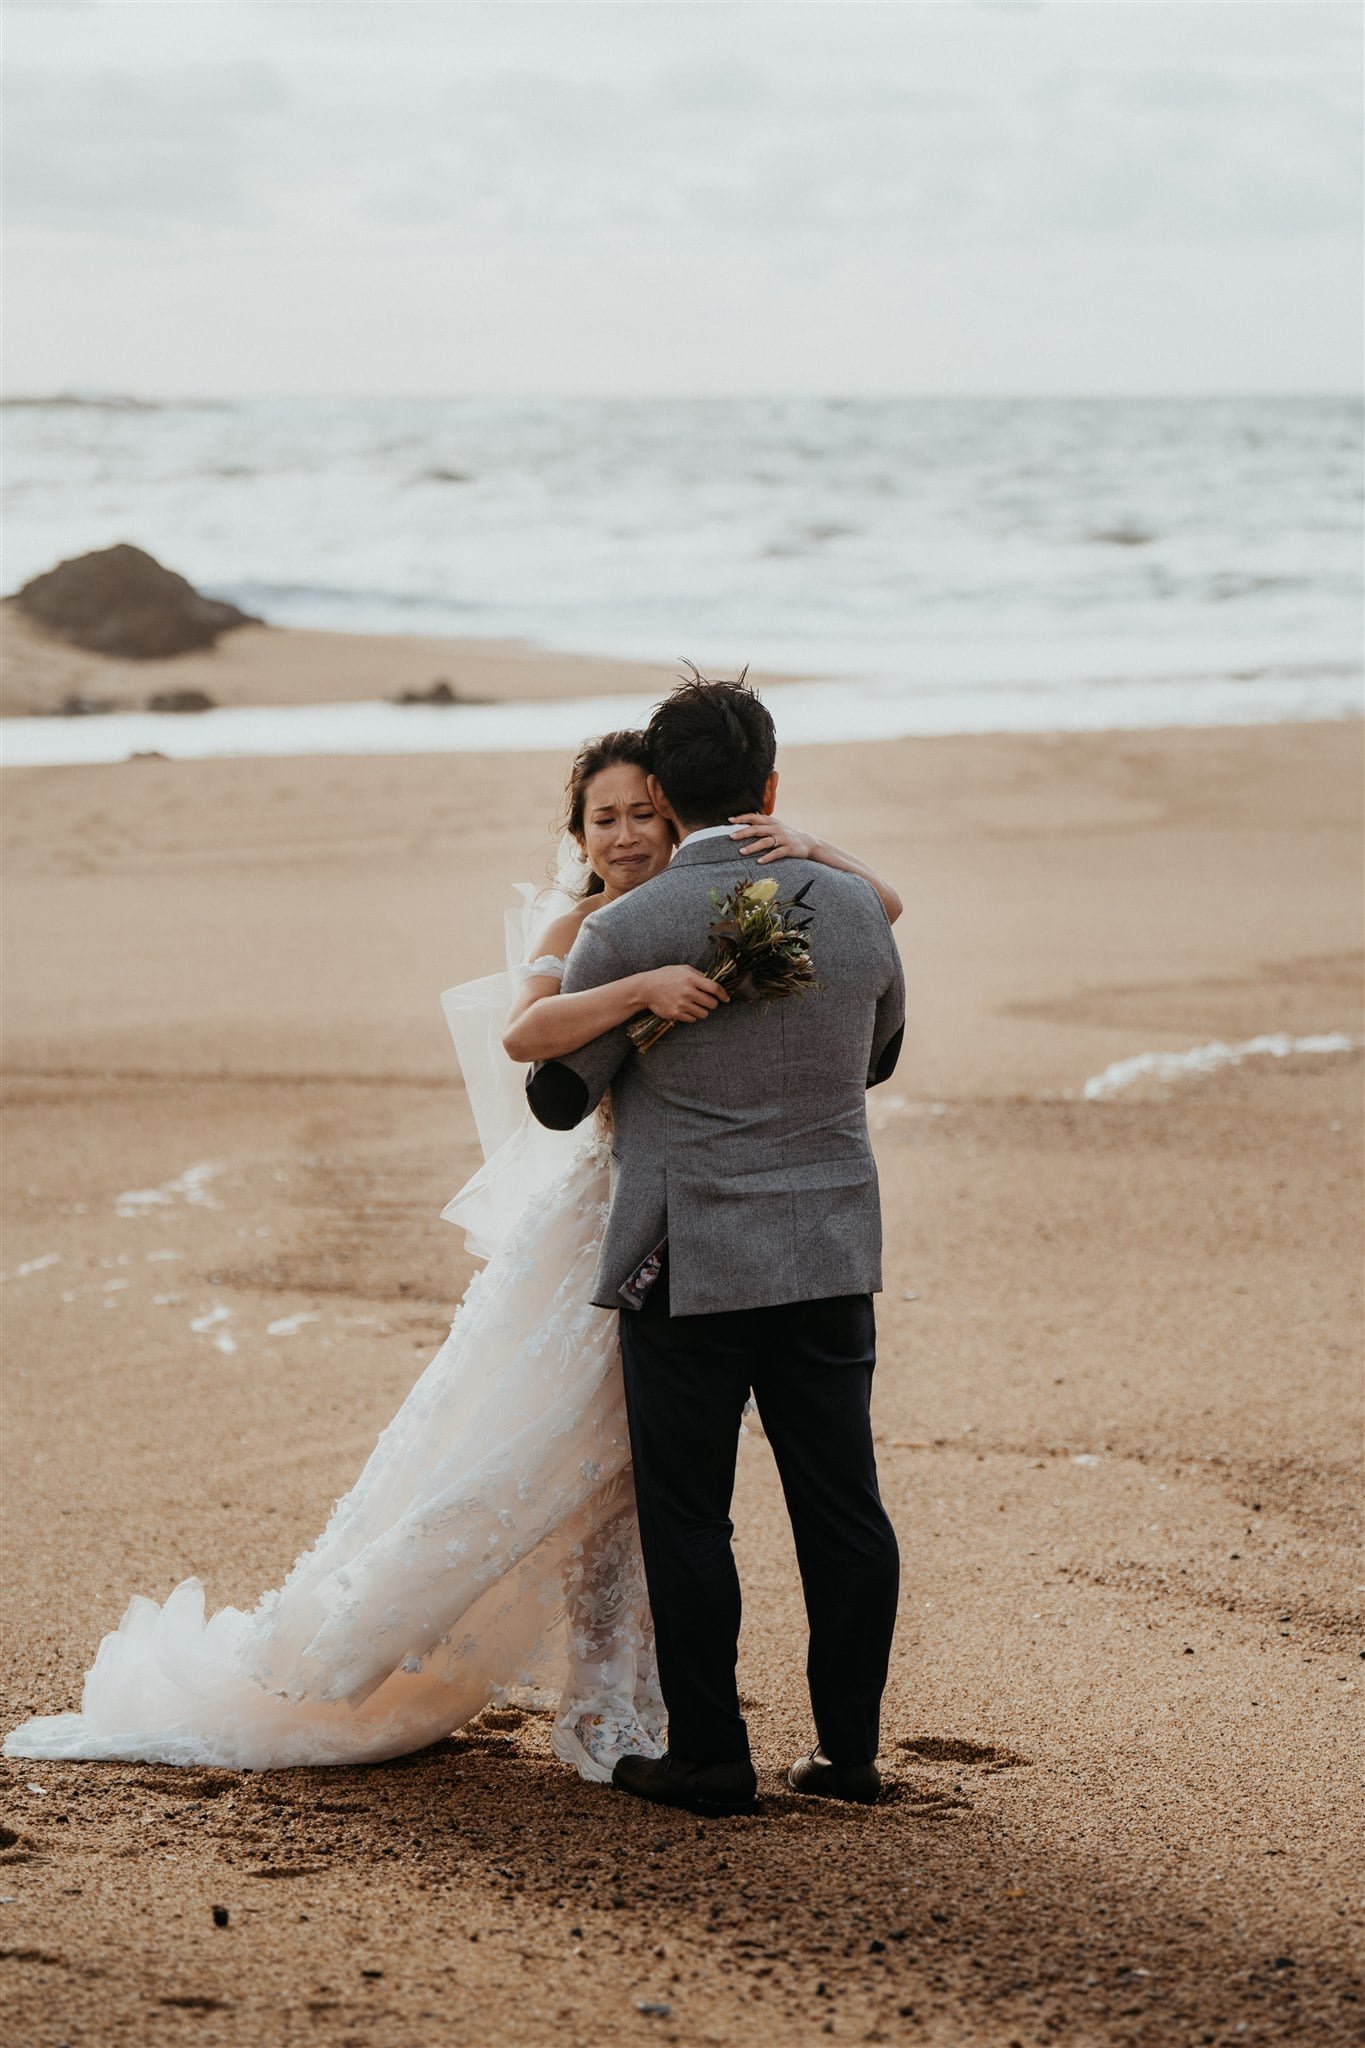 Bride and groom hug after exchanging vows on the beach during their Kyoto, Japan elopement